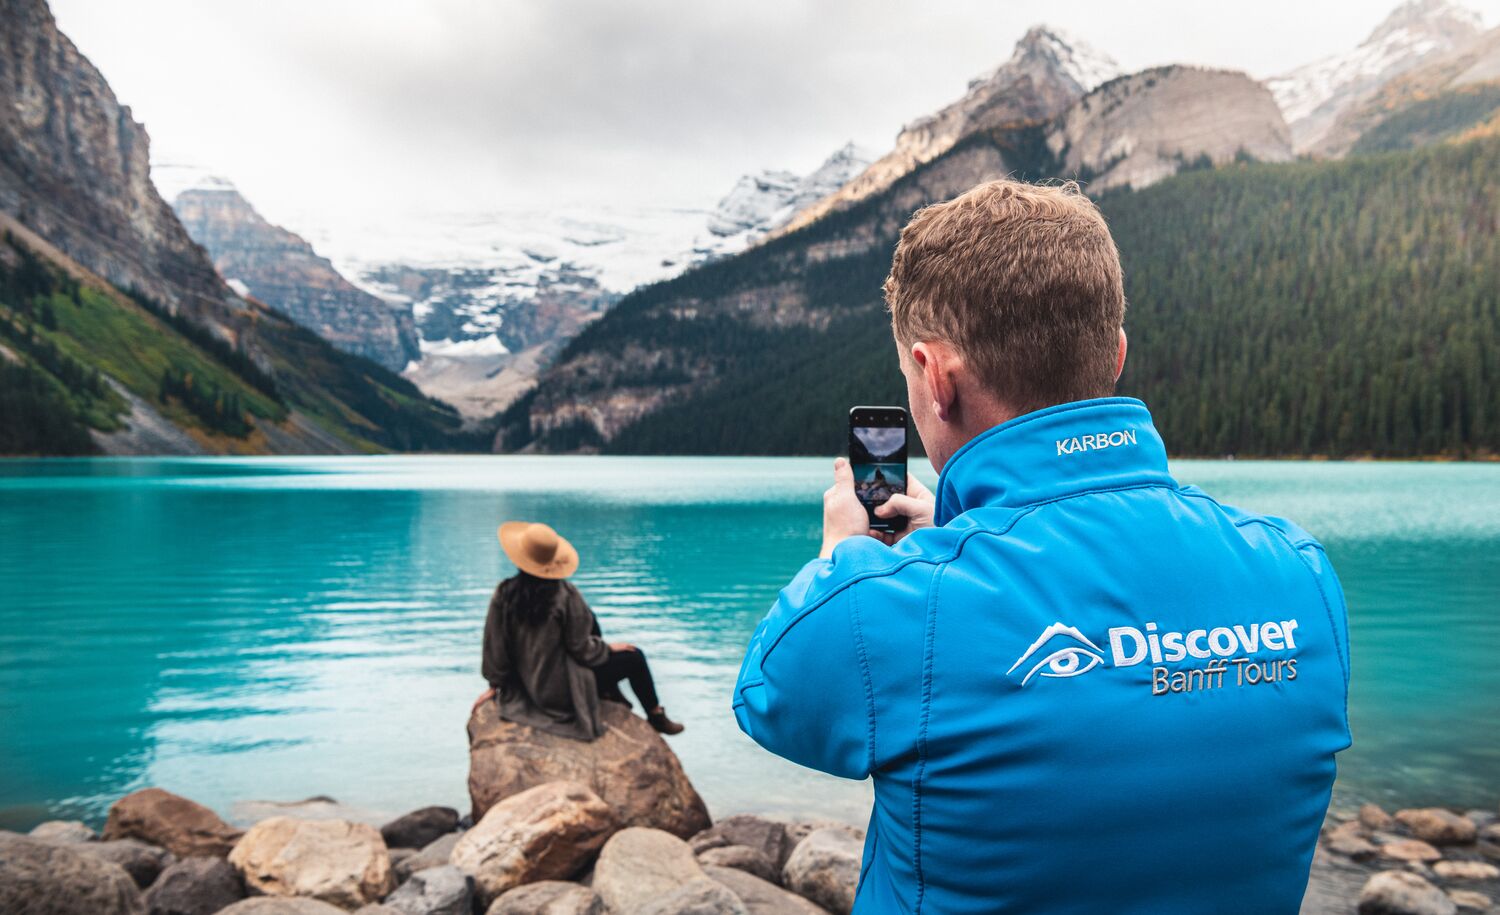 A Discover Banff Tours guide takes a photo of a person at Lake Louise in Banff National Park.